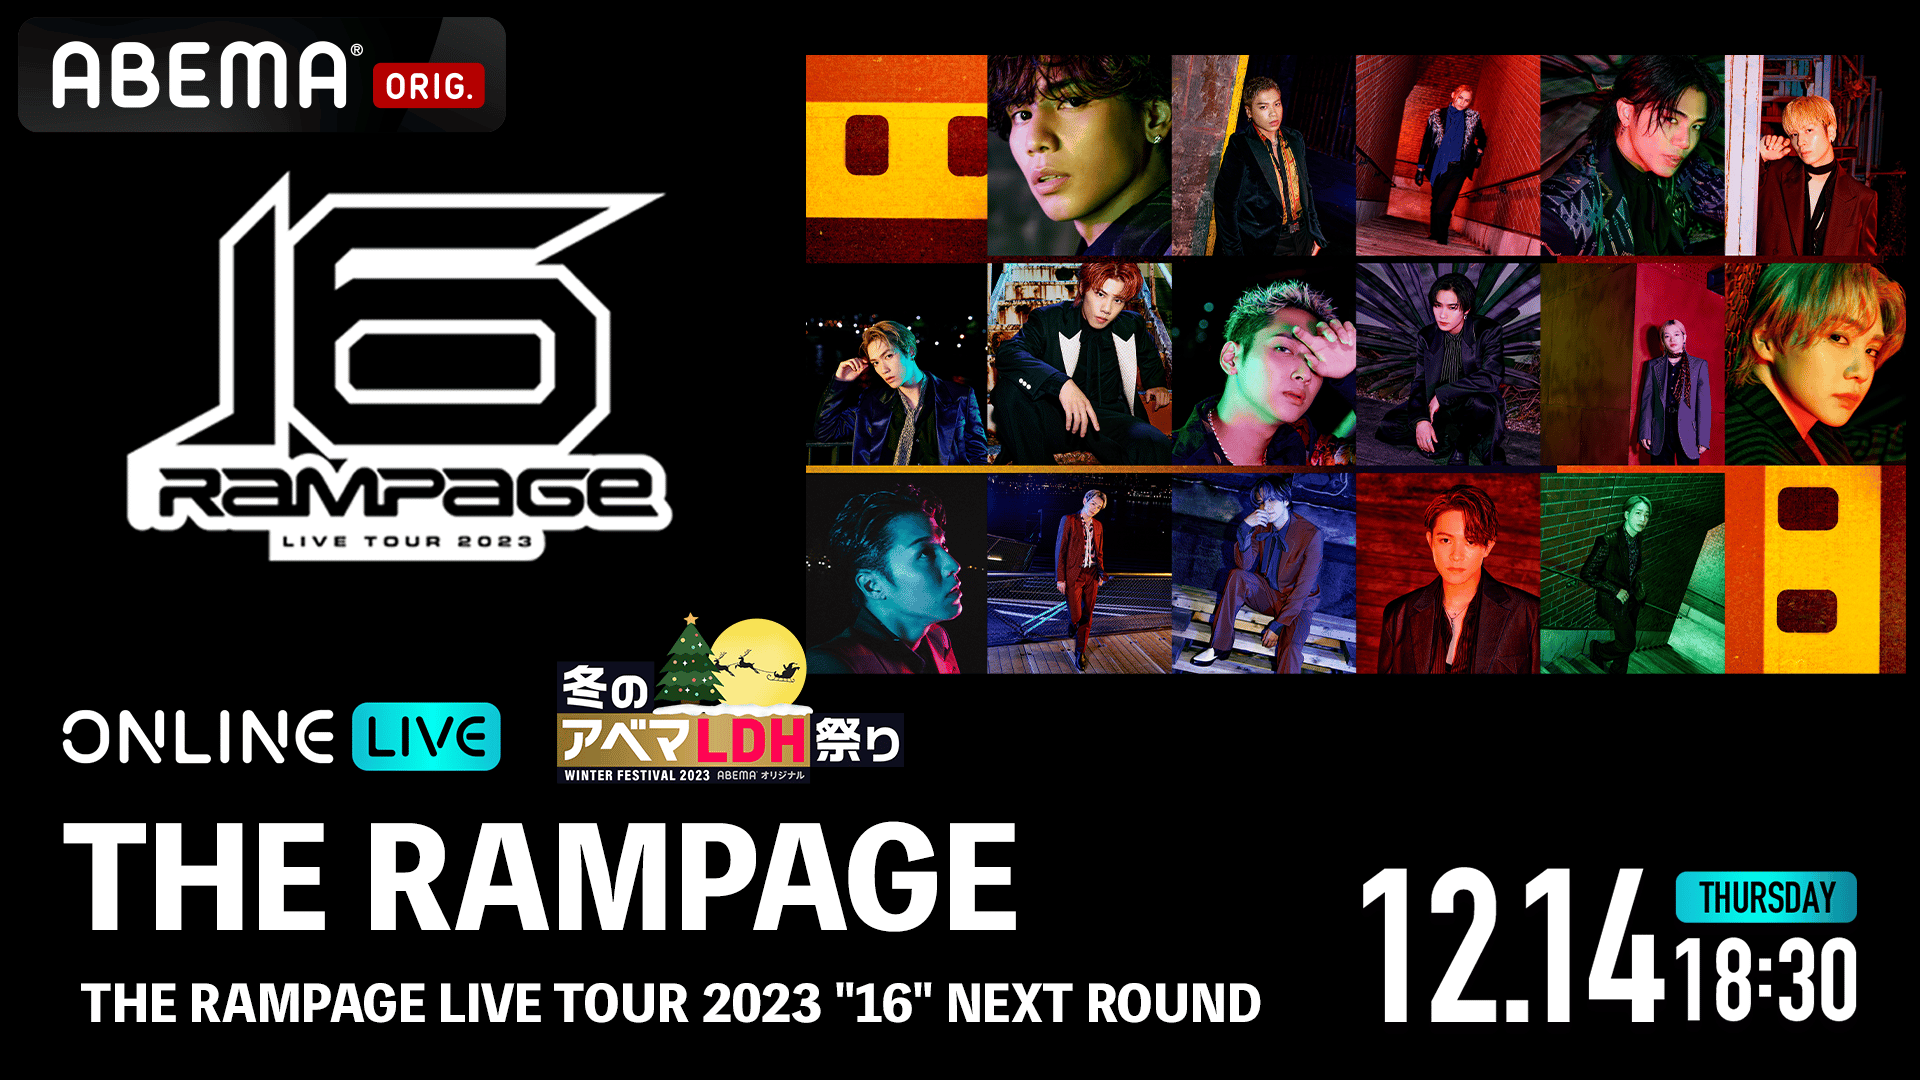 THE RAMPAGE LIVE TOUR 2023